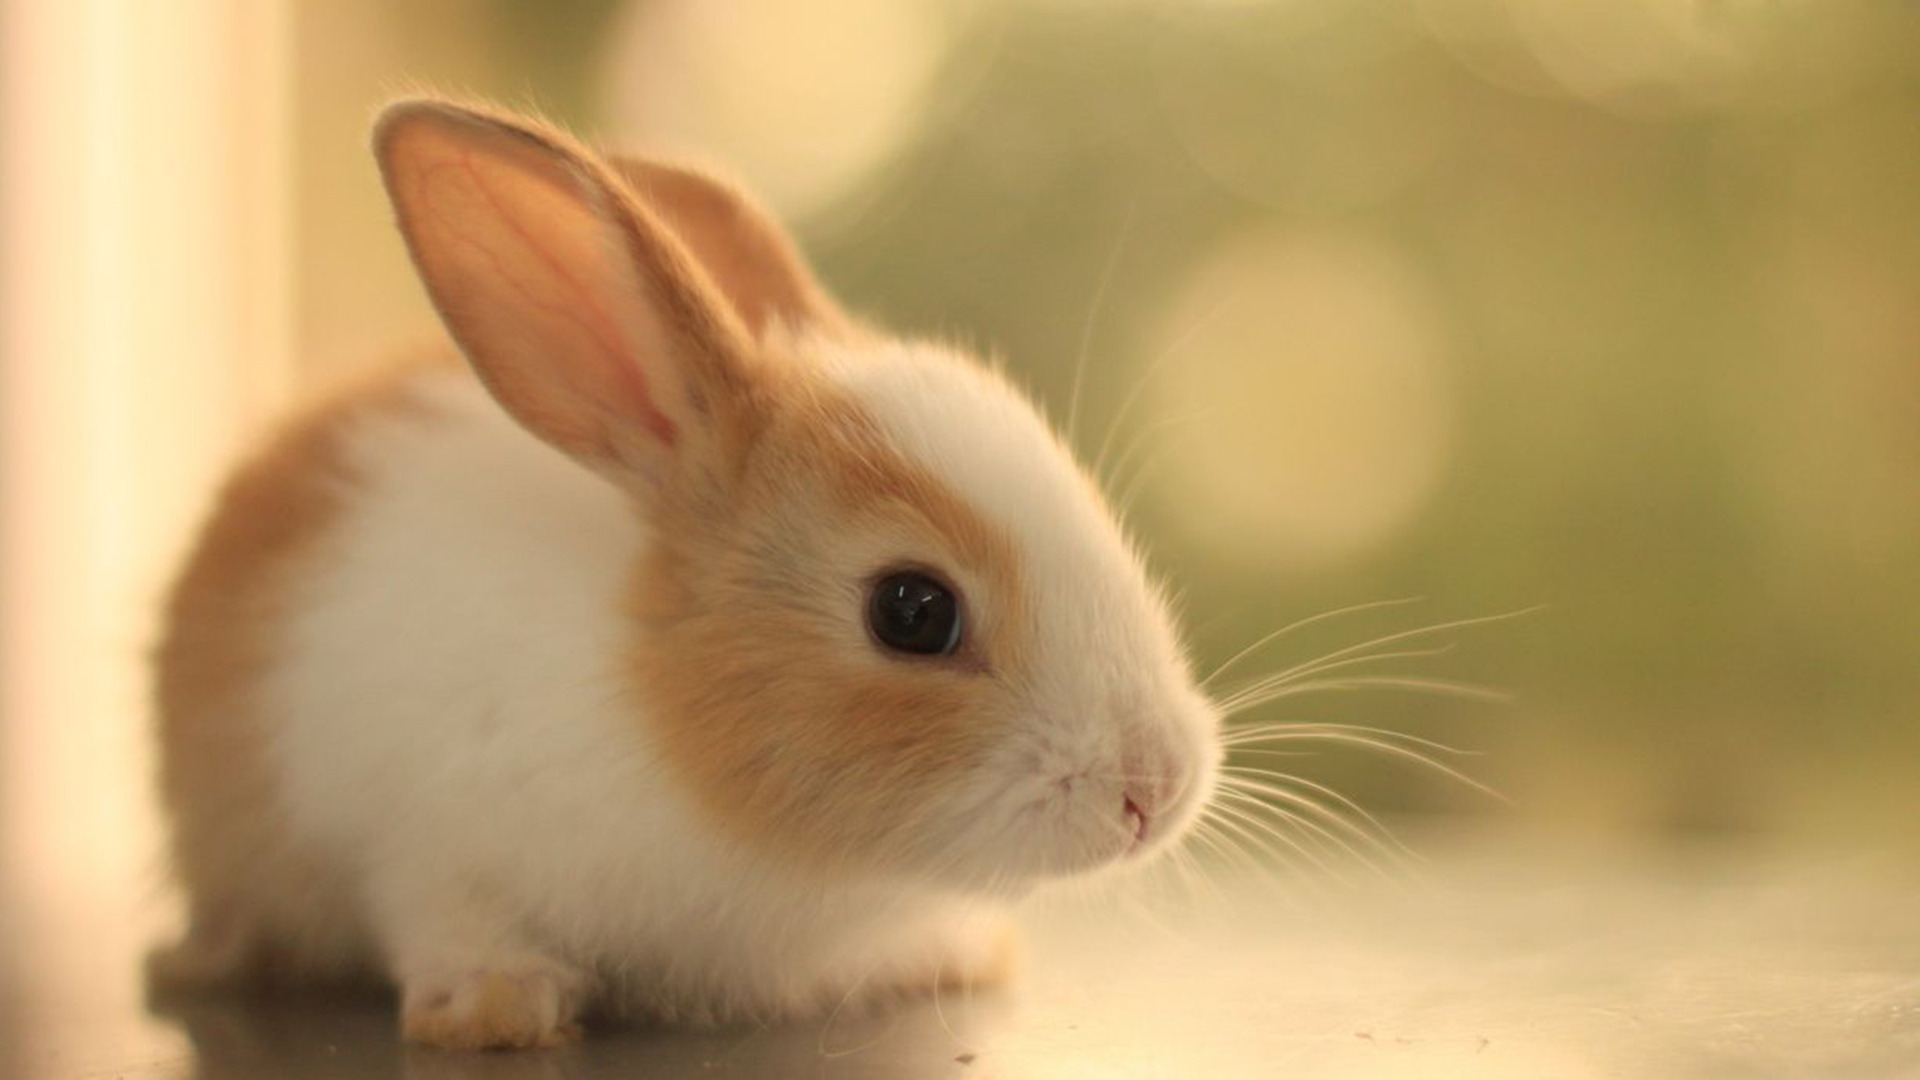 Cute Bunny Wallpapers for Windows Free Download 